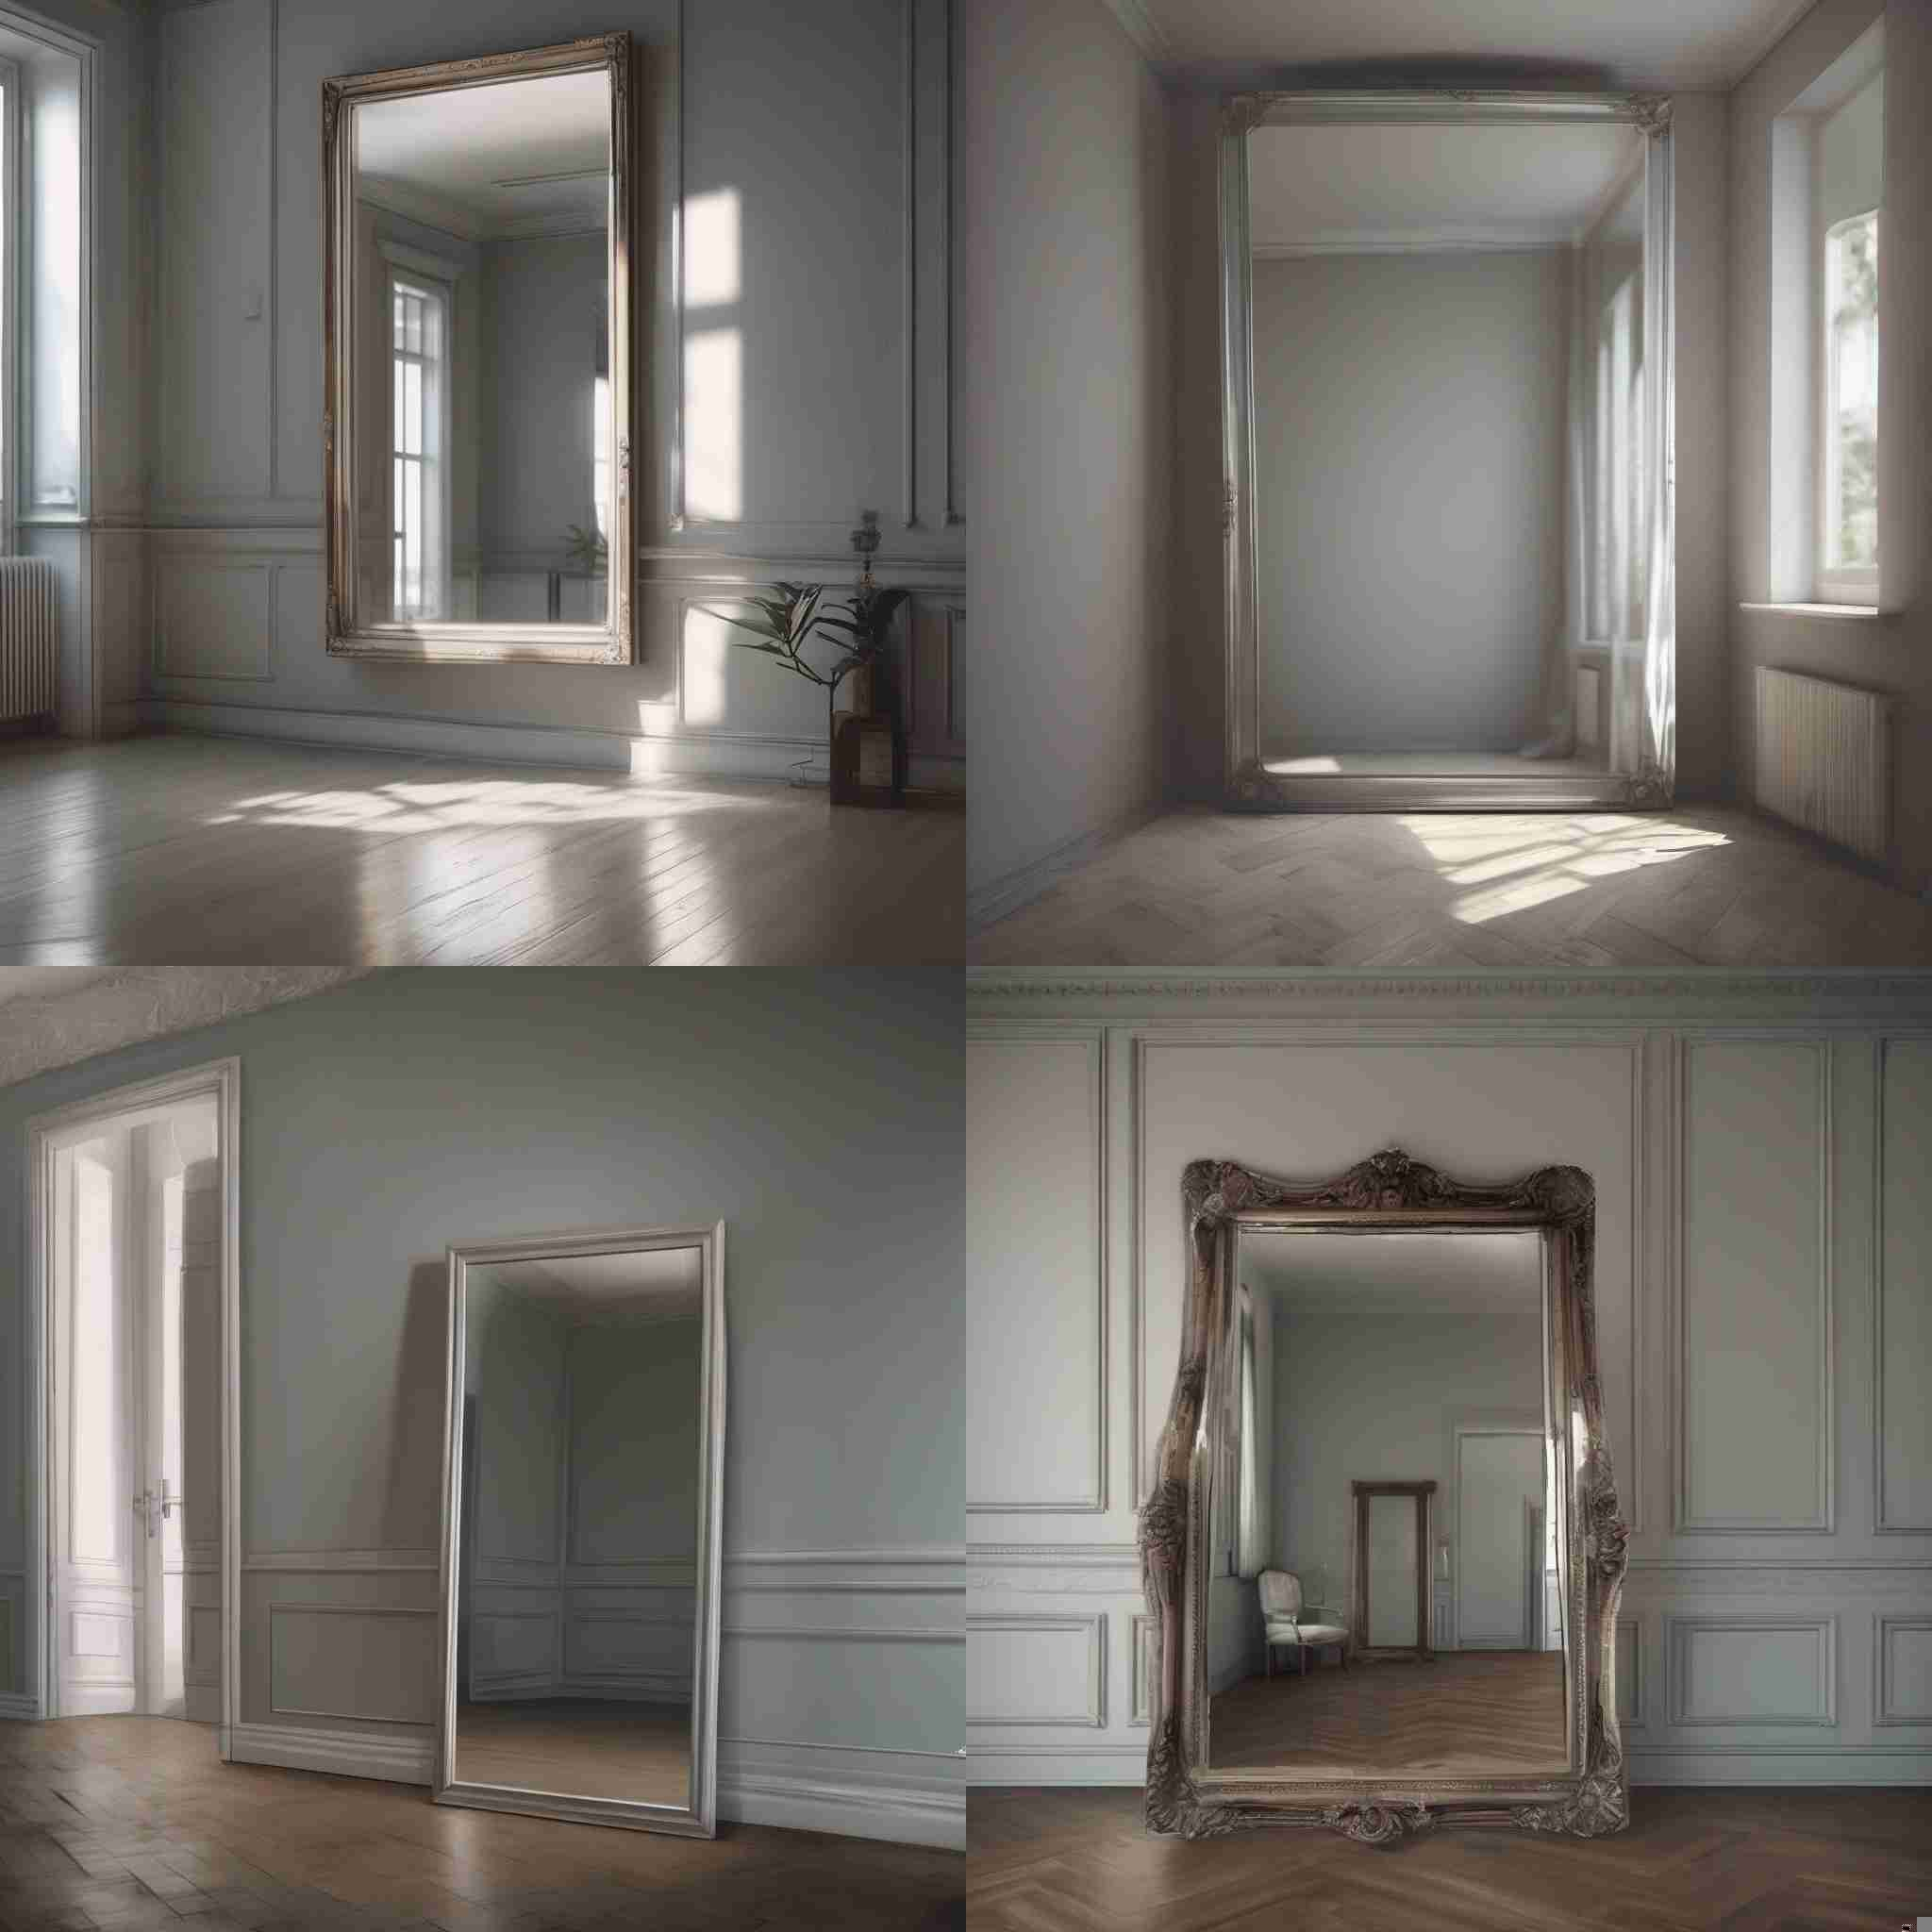 A mirror in a room without light